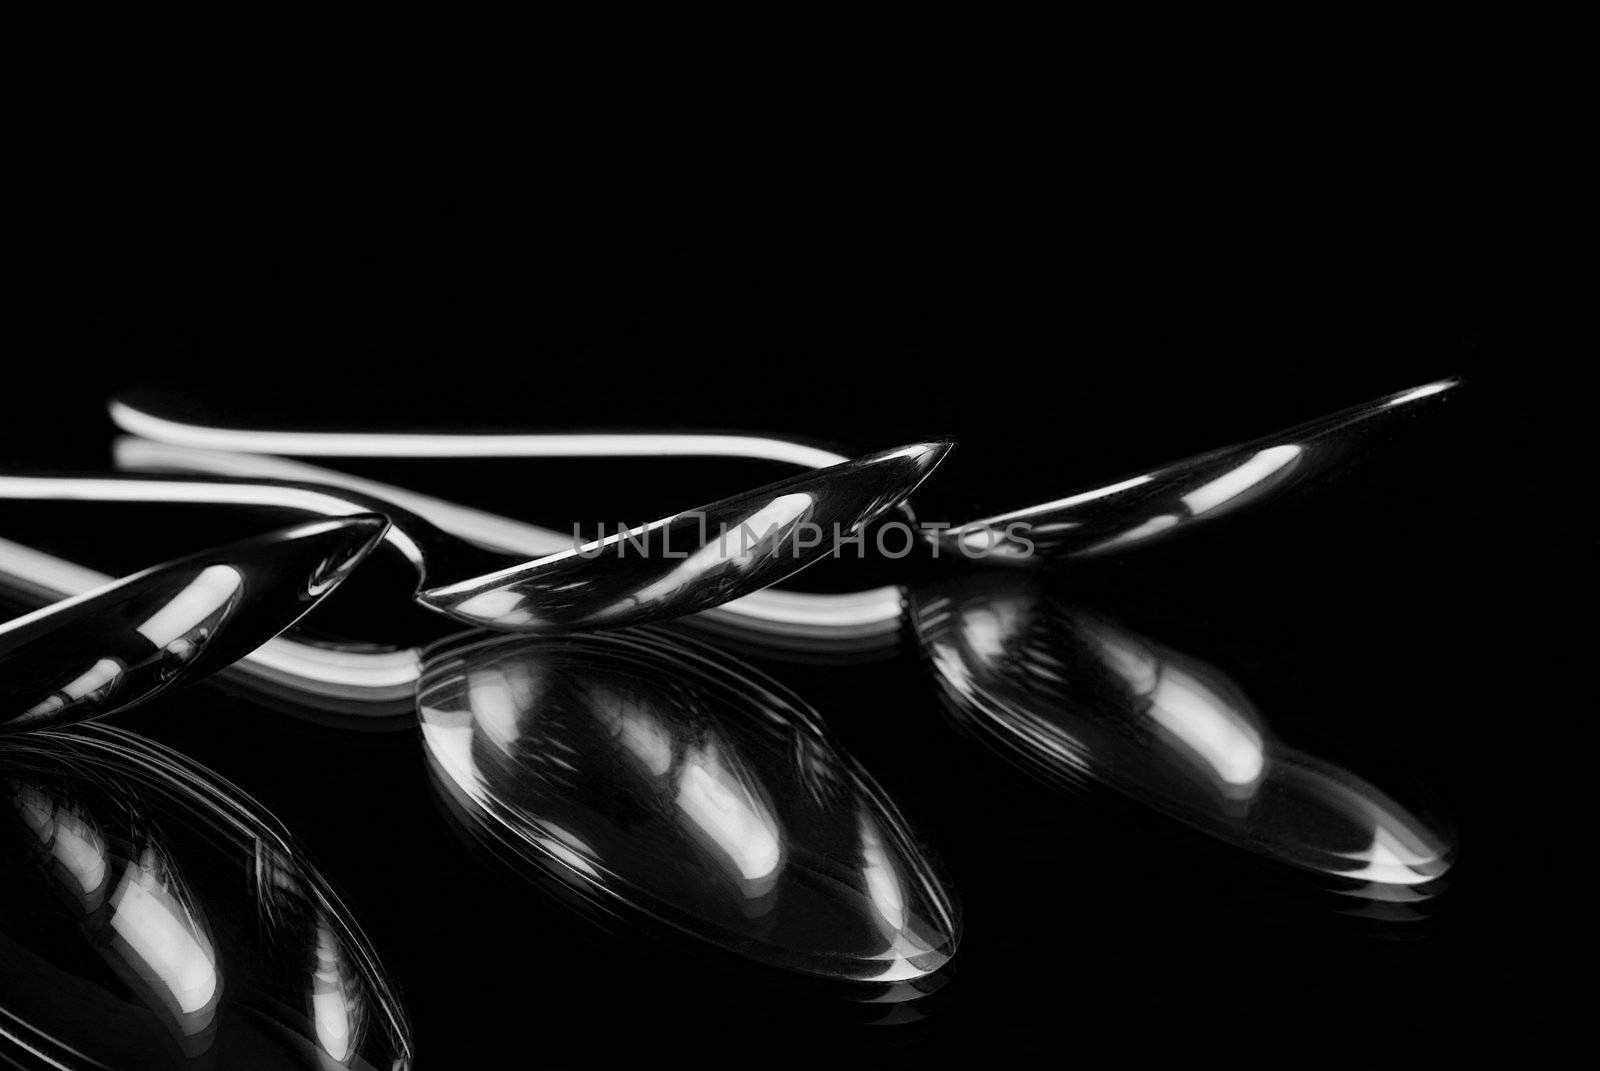 Silver spoons reflecting in mirror with a black background